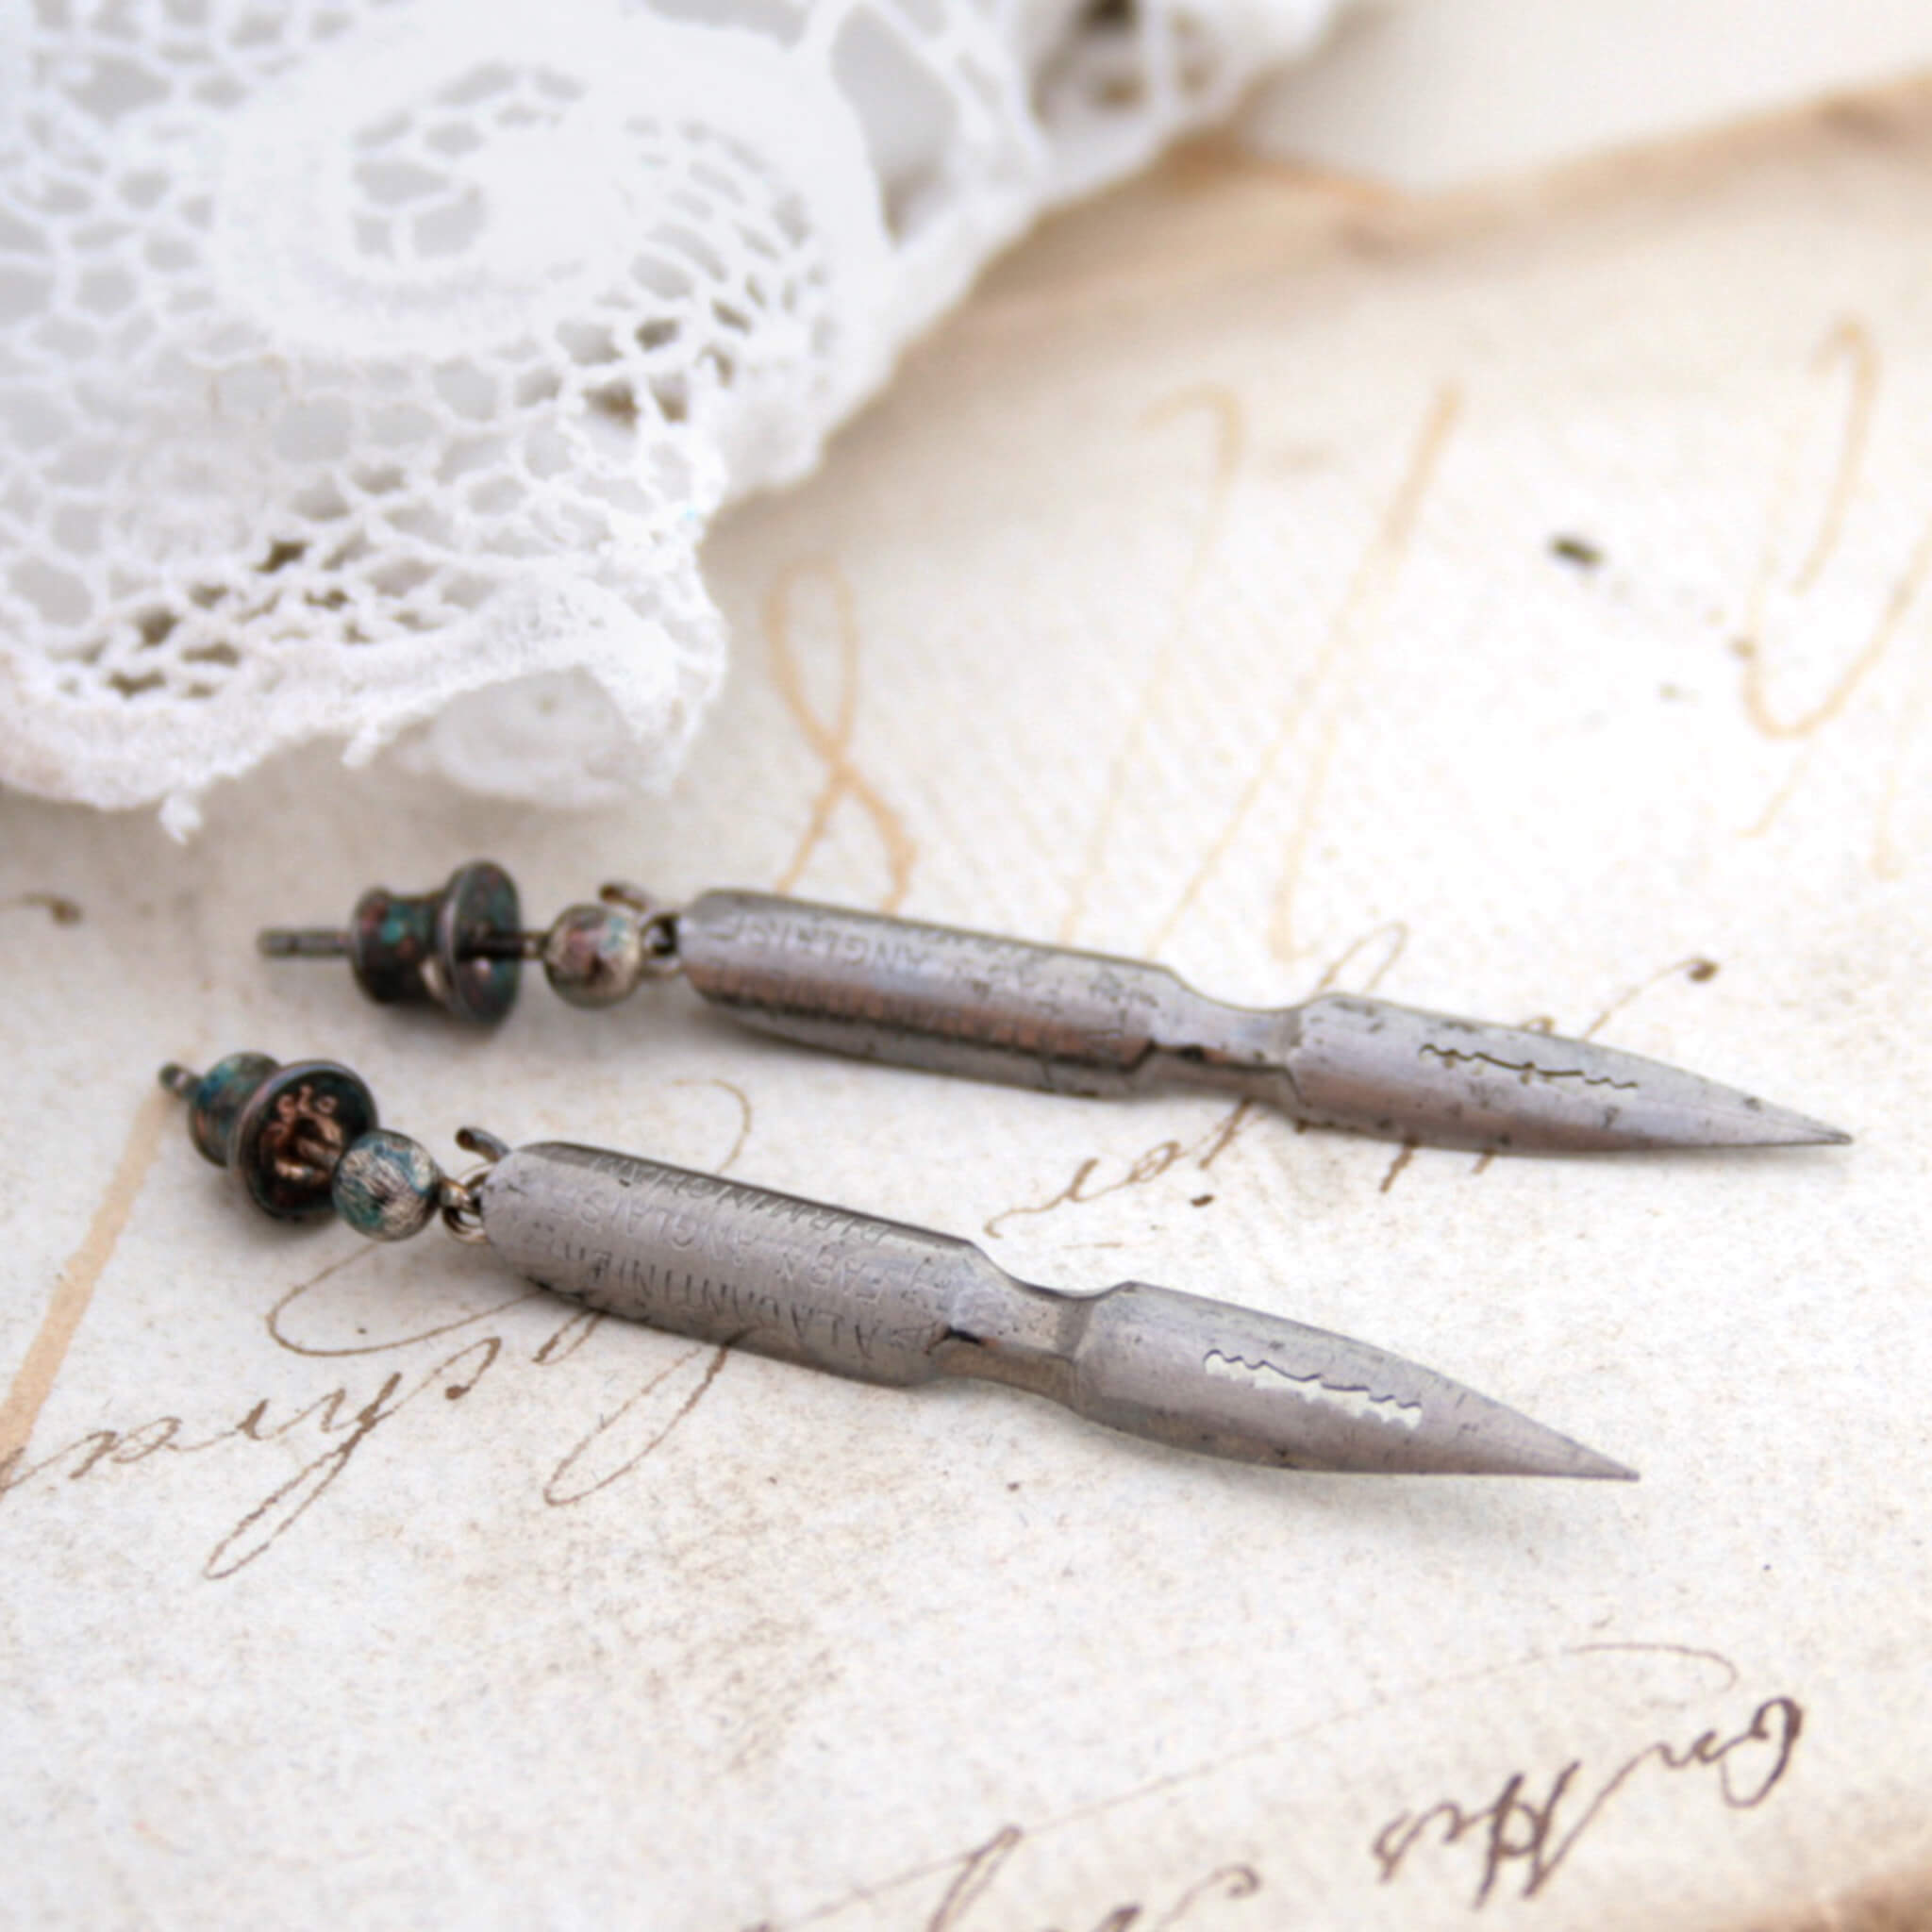 quirky earrings made of antique pen nibs lying on an old letter